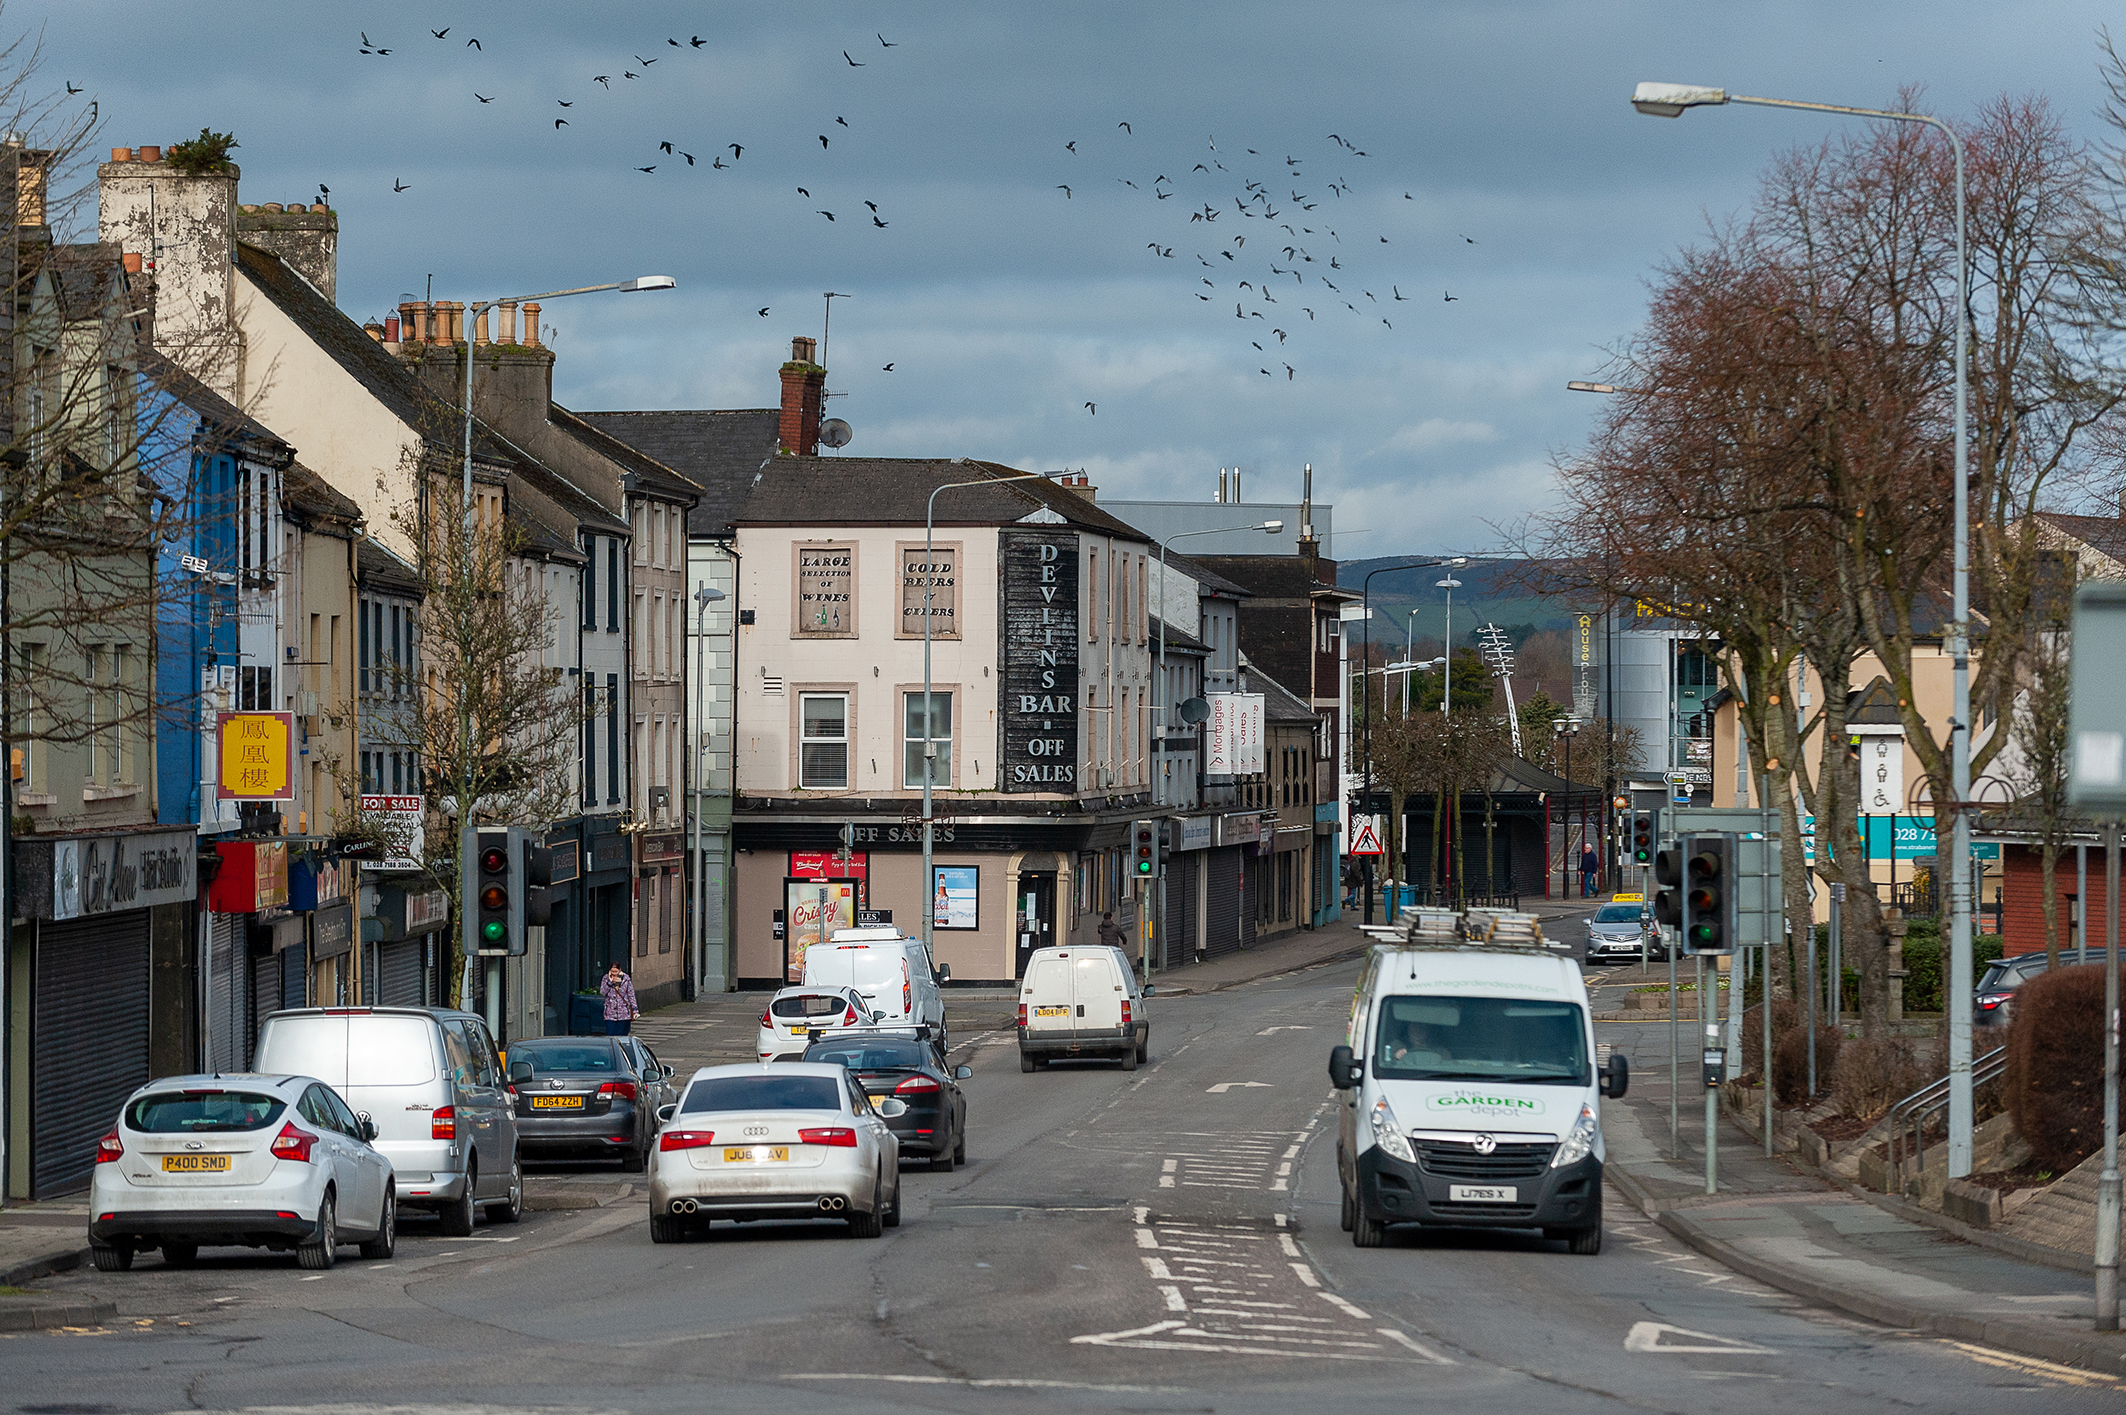 City deal ‘reassessment’ should not impact plans for Strabane